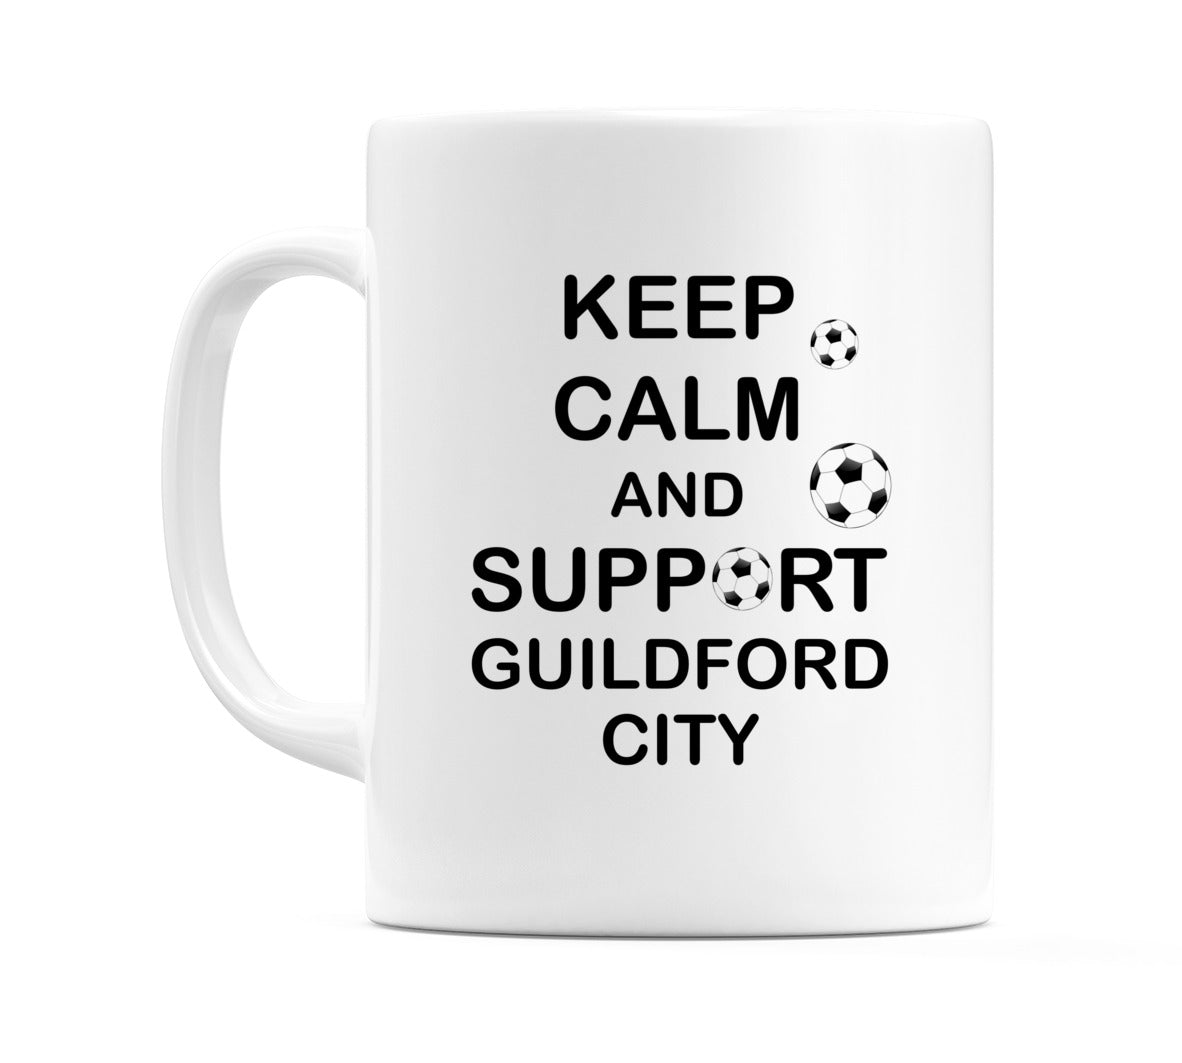 Keep Calm And Support Guildford City Mug